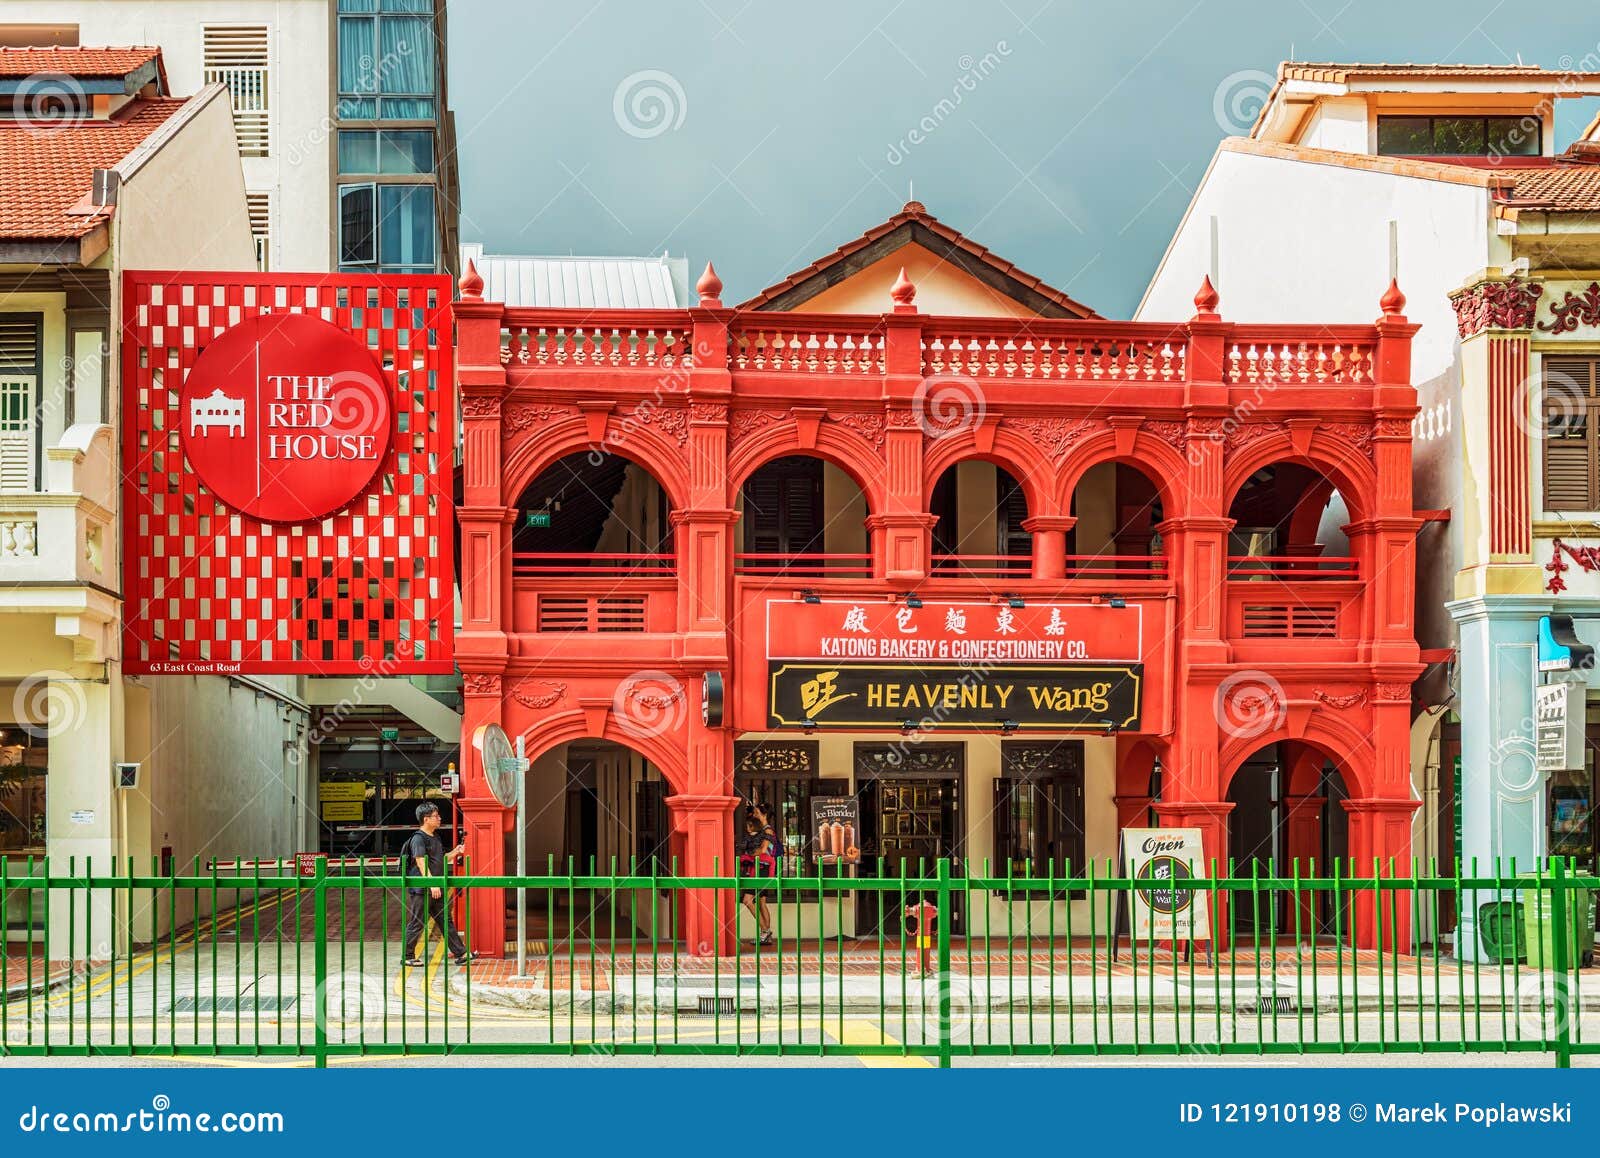 The Red House Old Colonial Building at Square Singapor Editorial Stock Photo - Image of roof, landmark: